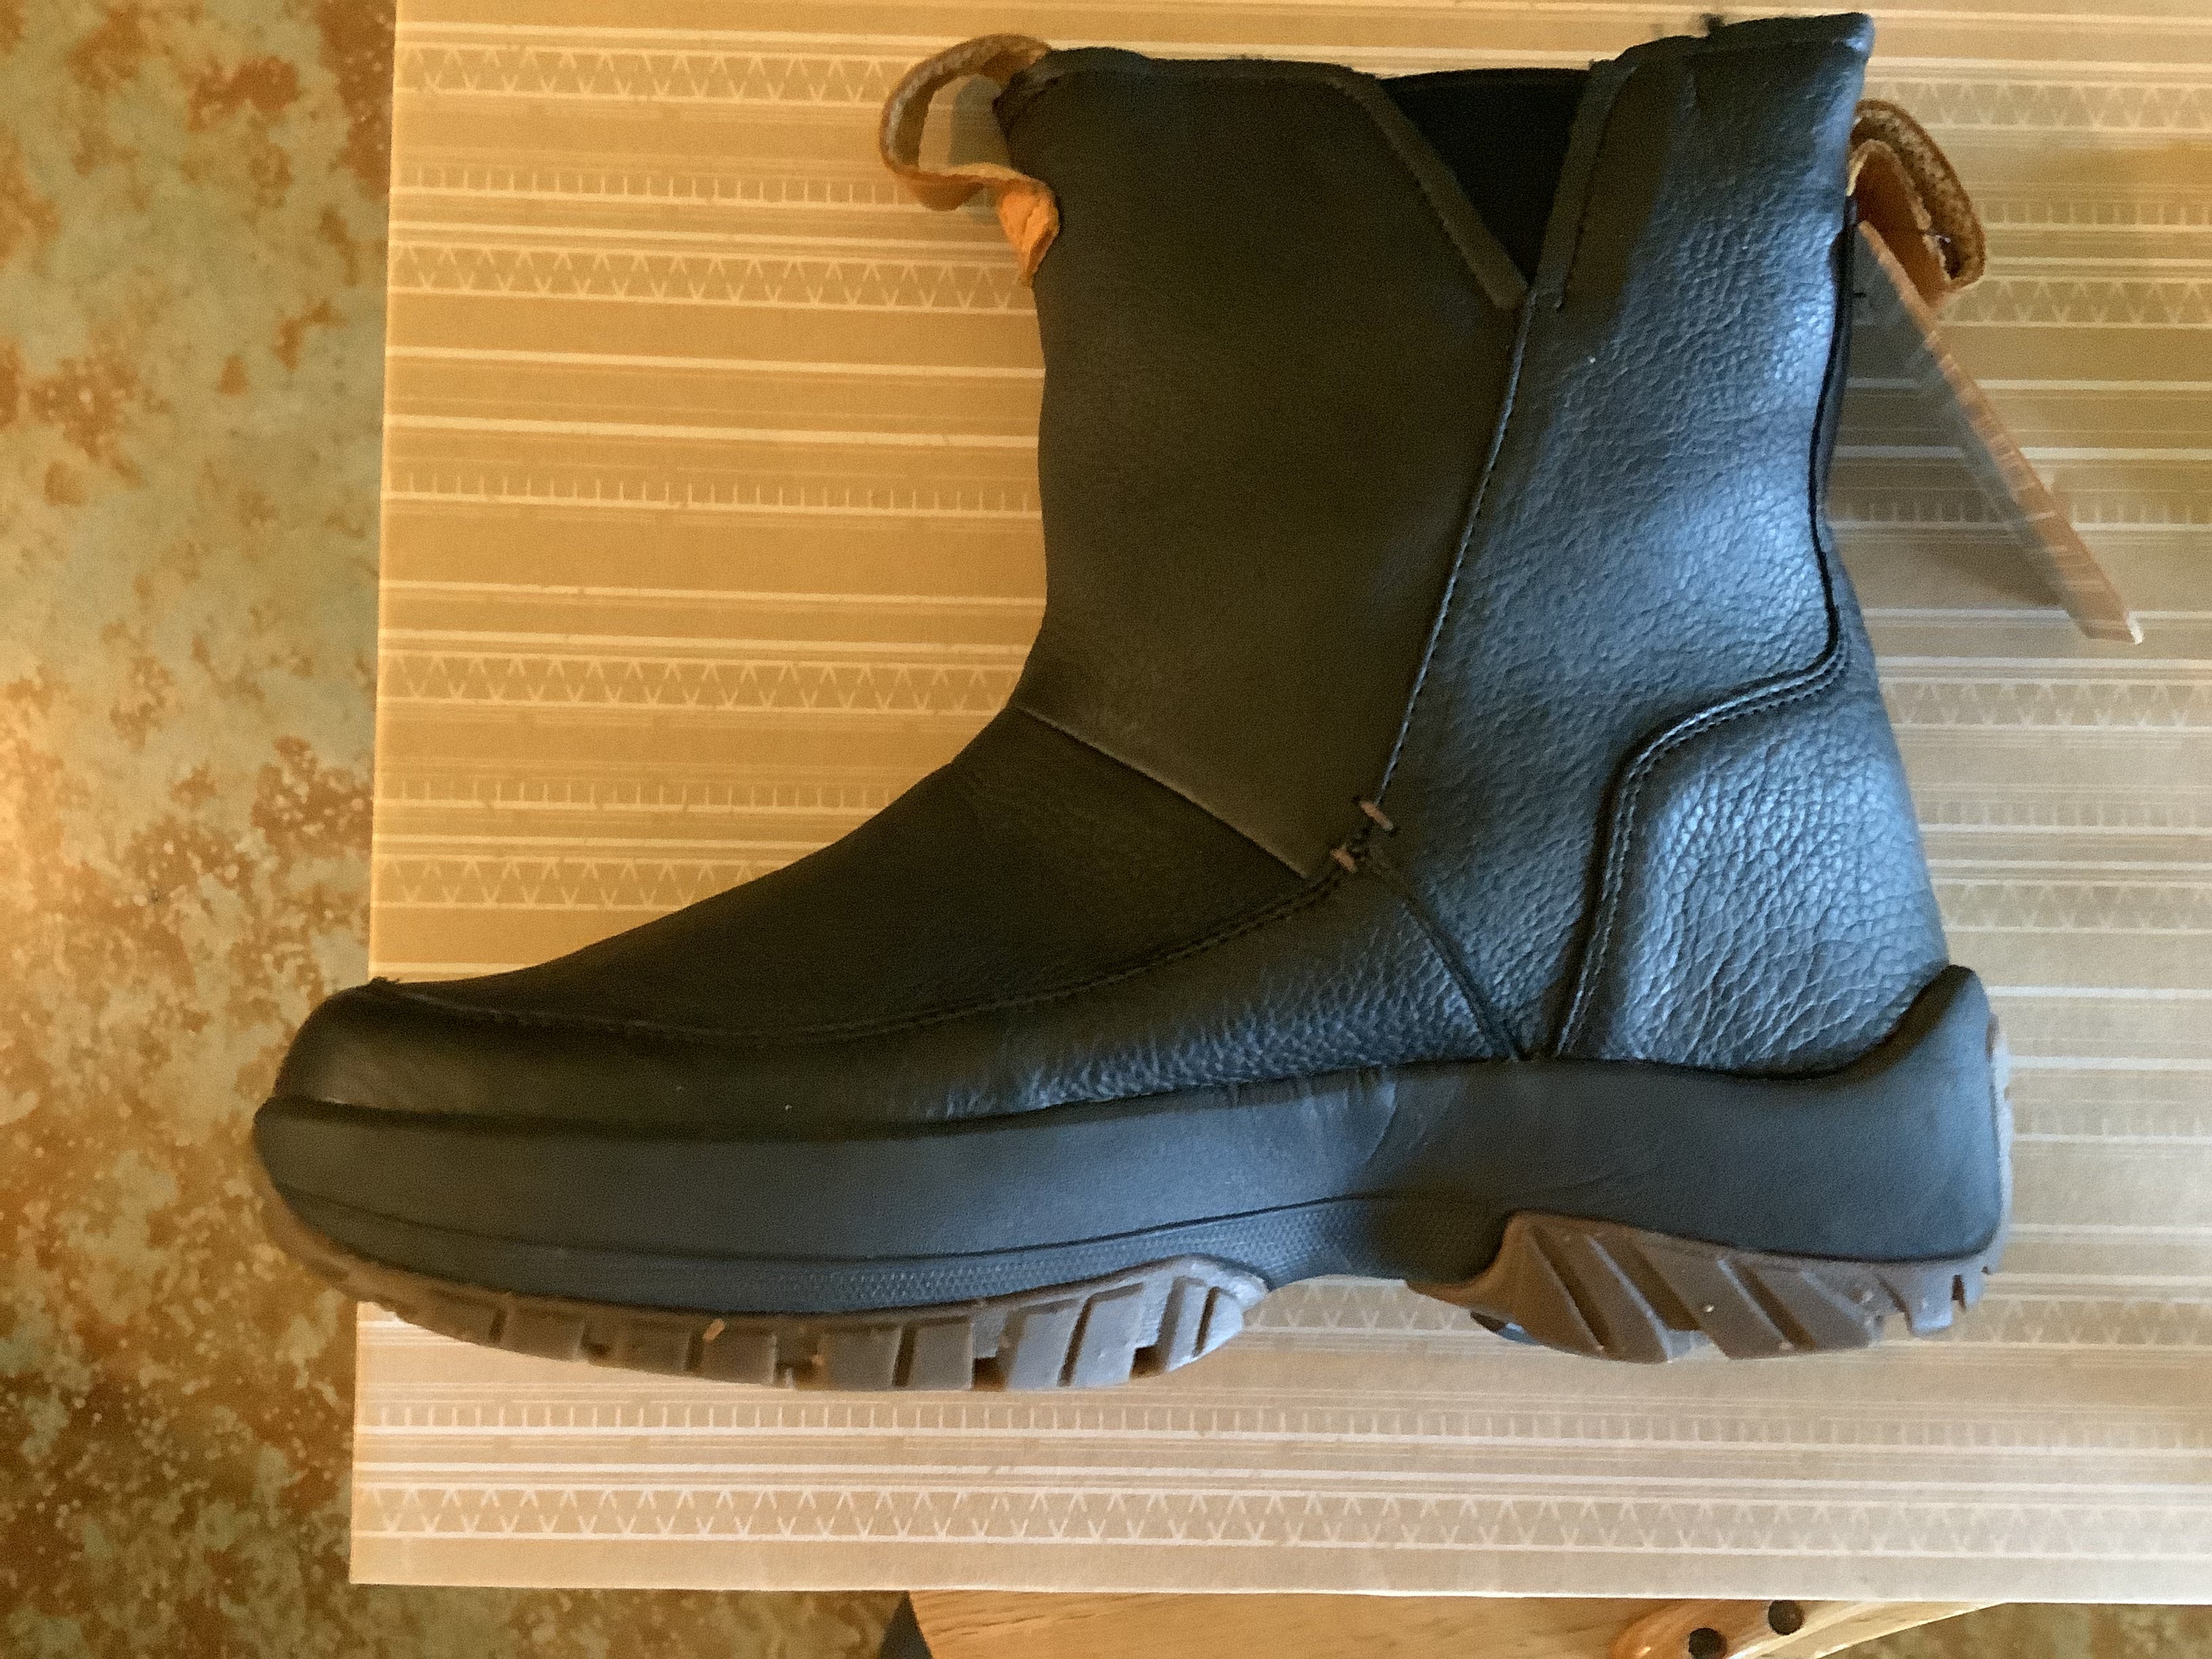 ULU - "Tupik" men's (and ladies??) bison leather/shearling lined winter boot.